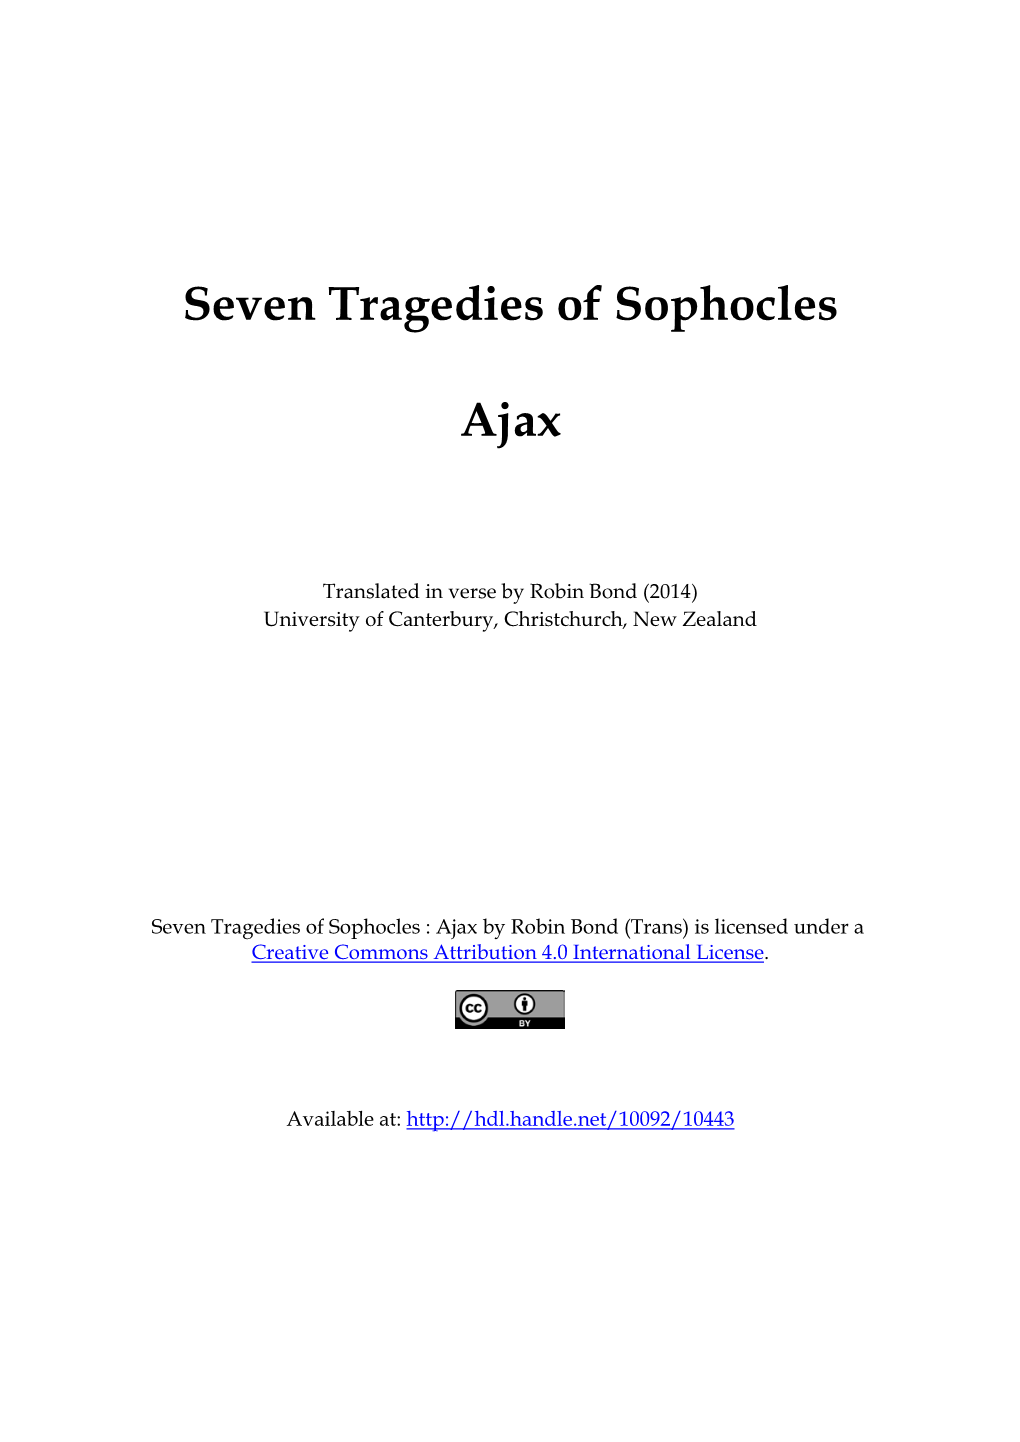 Seven Tragedies of Sophocles